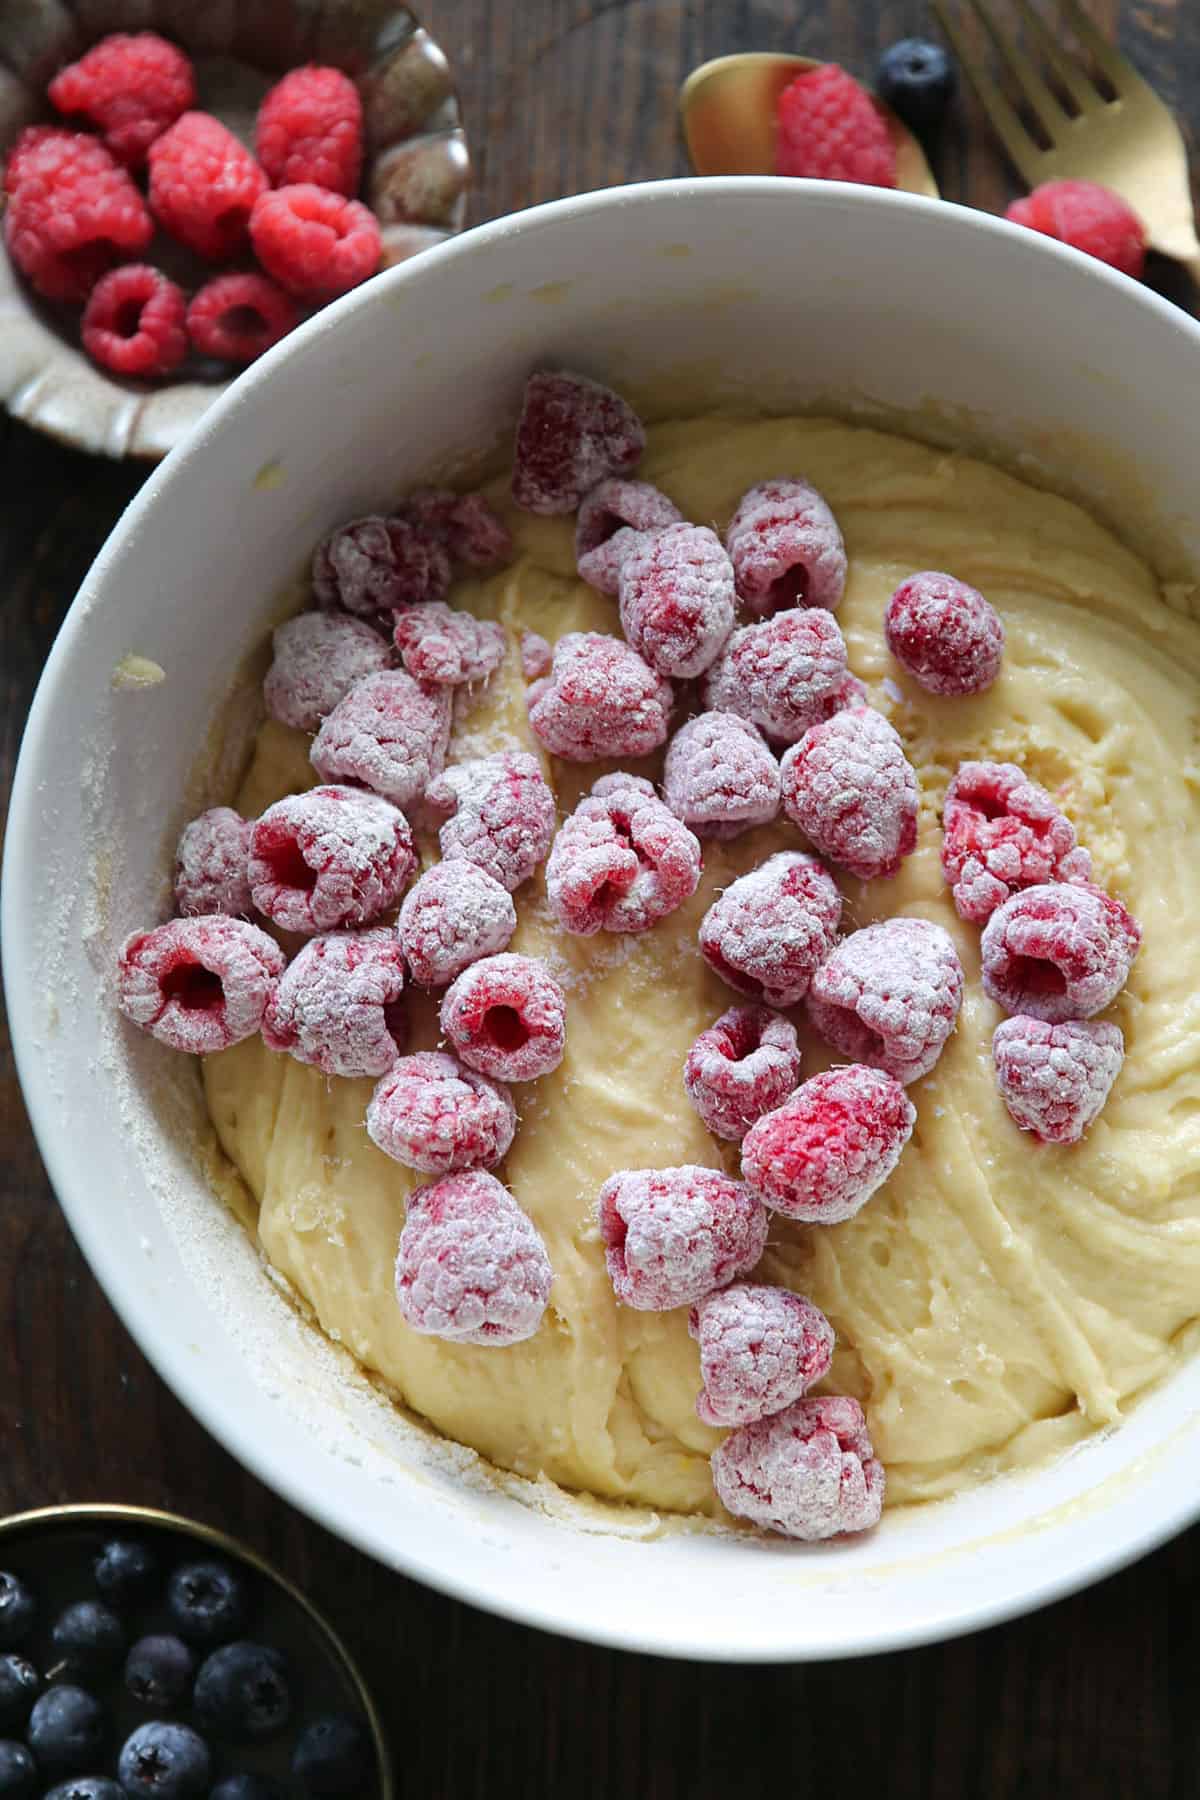 flour coated raspberries and cake batter in a bowl.